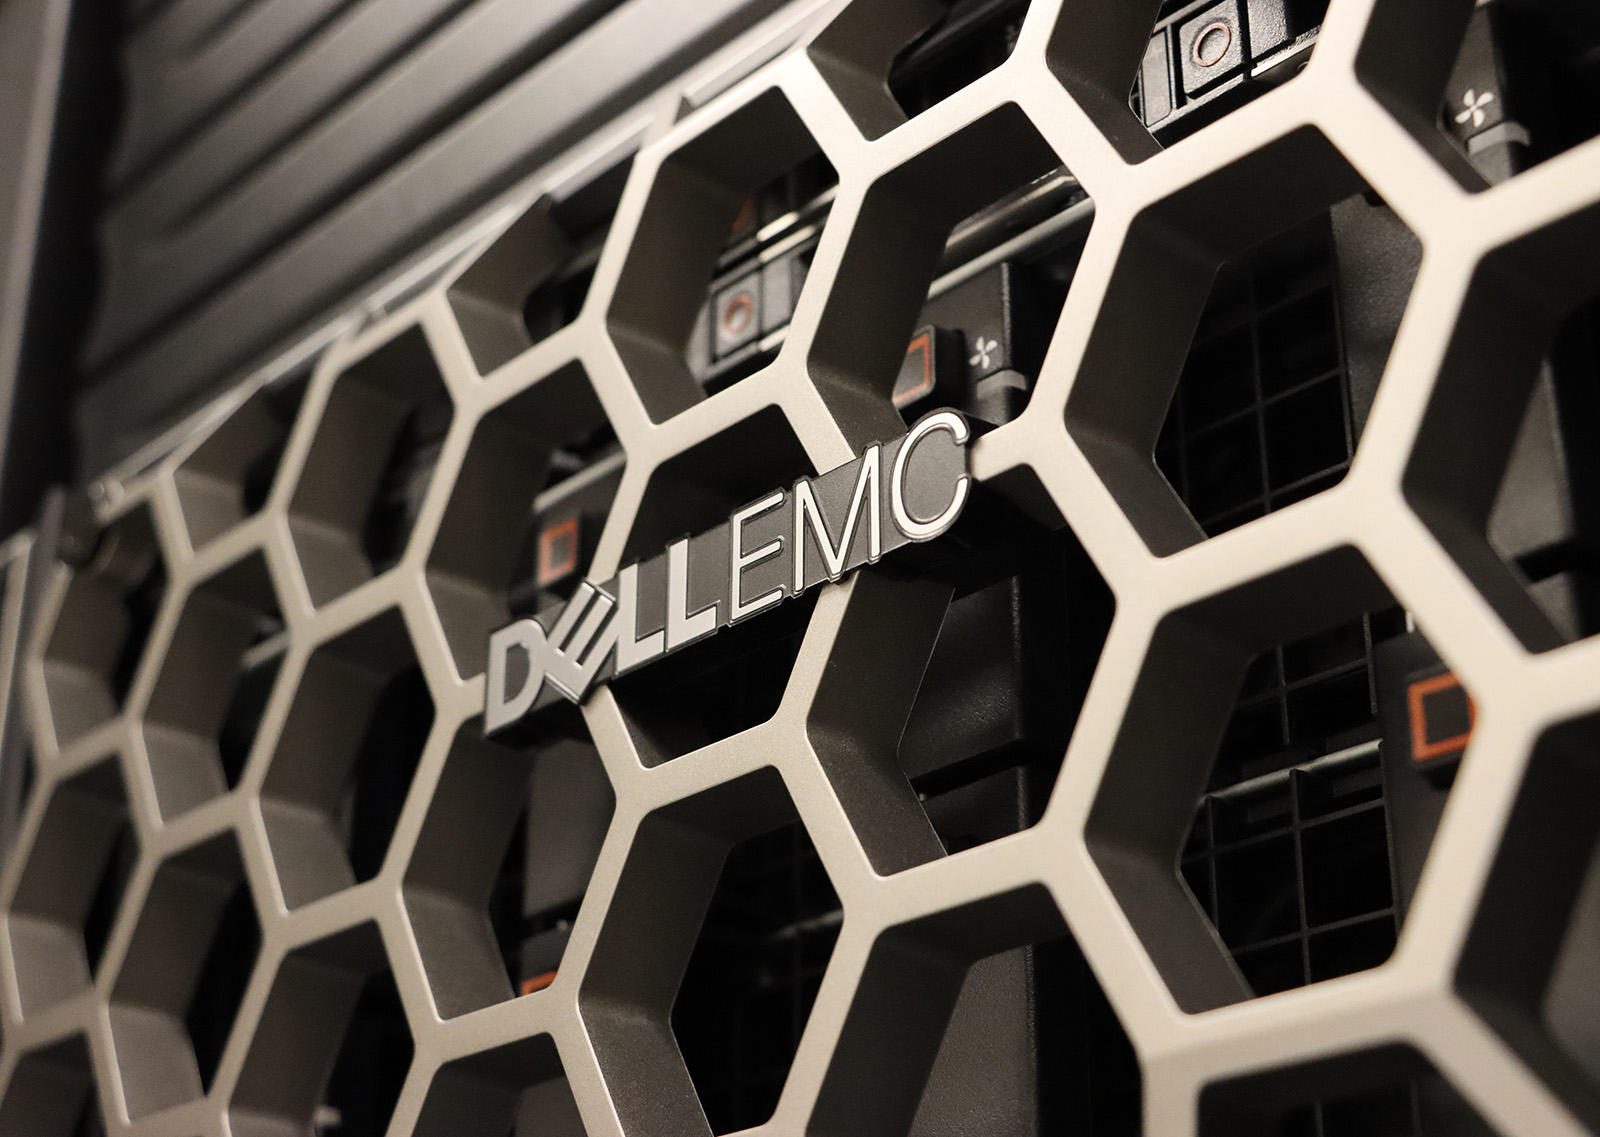 The faceplate of the Ascend test node, which reads 'Dell EMC' with a hexagonal pattern behind the text.